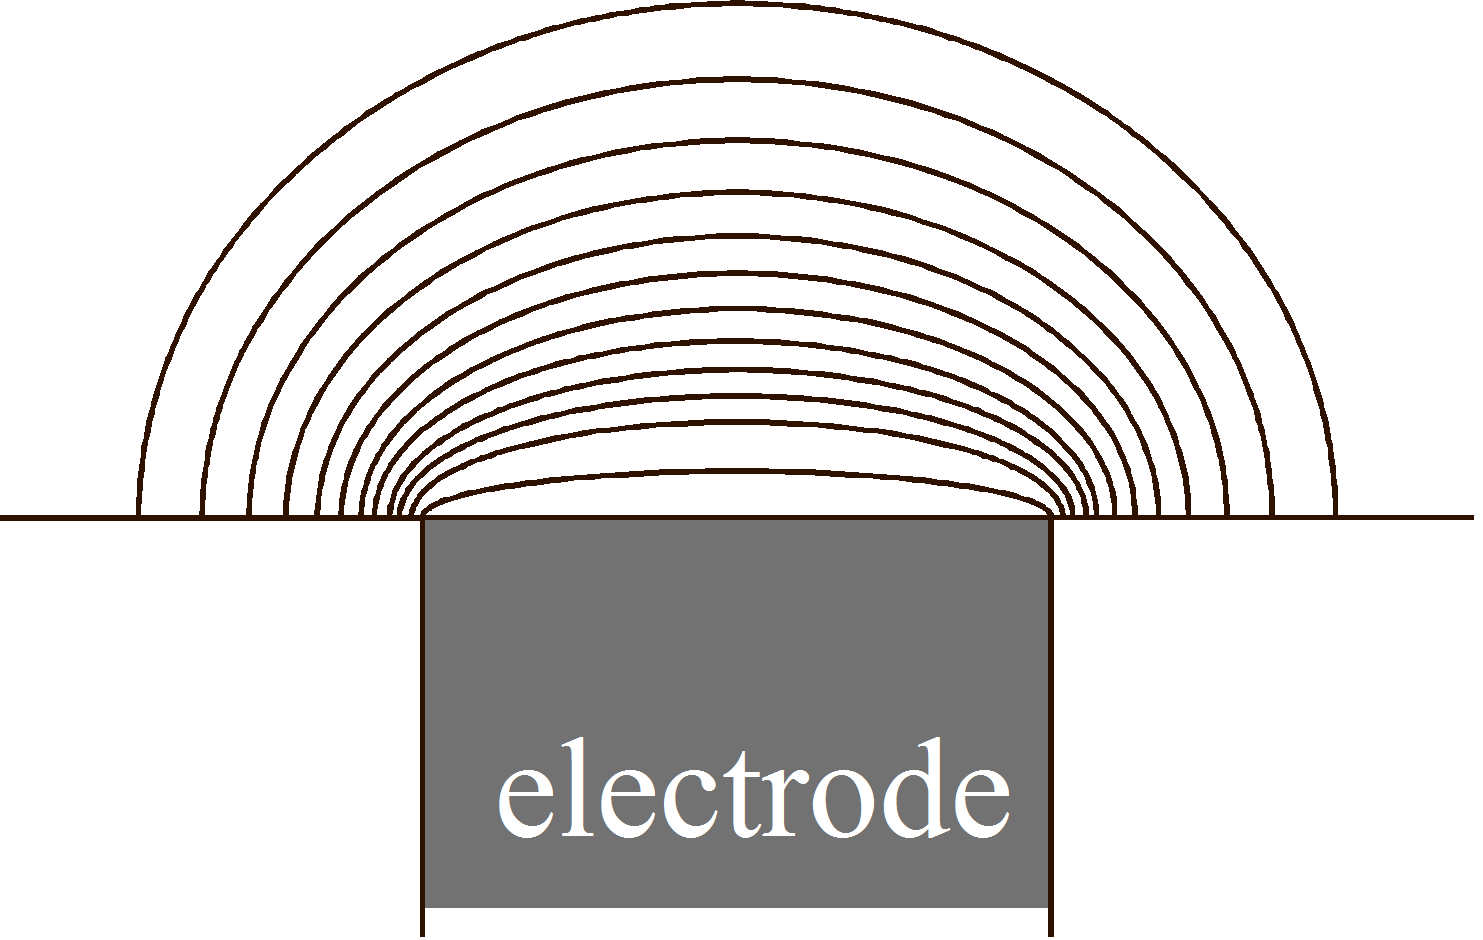 Equiconcentration lines near microelectrode.